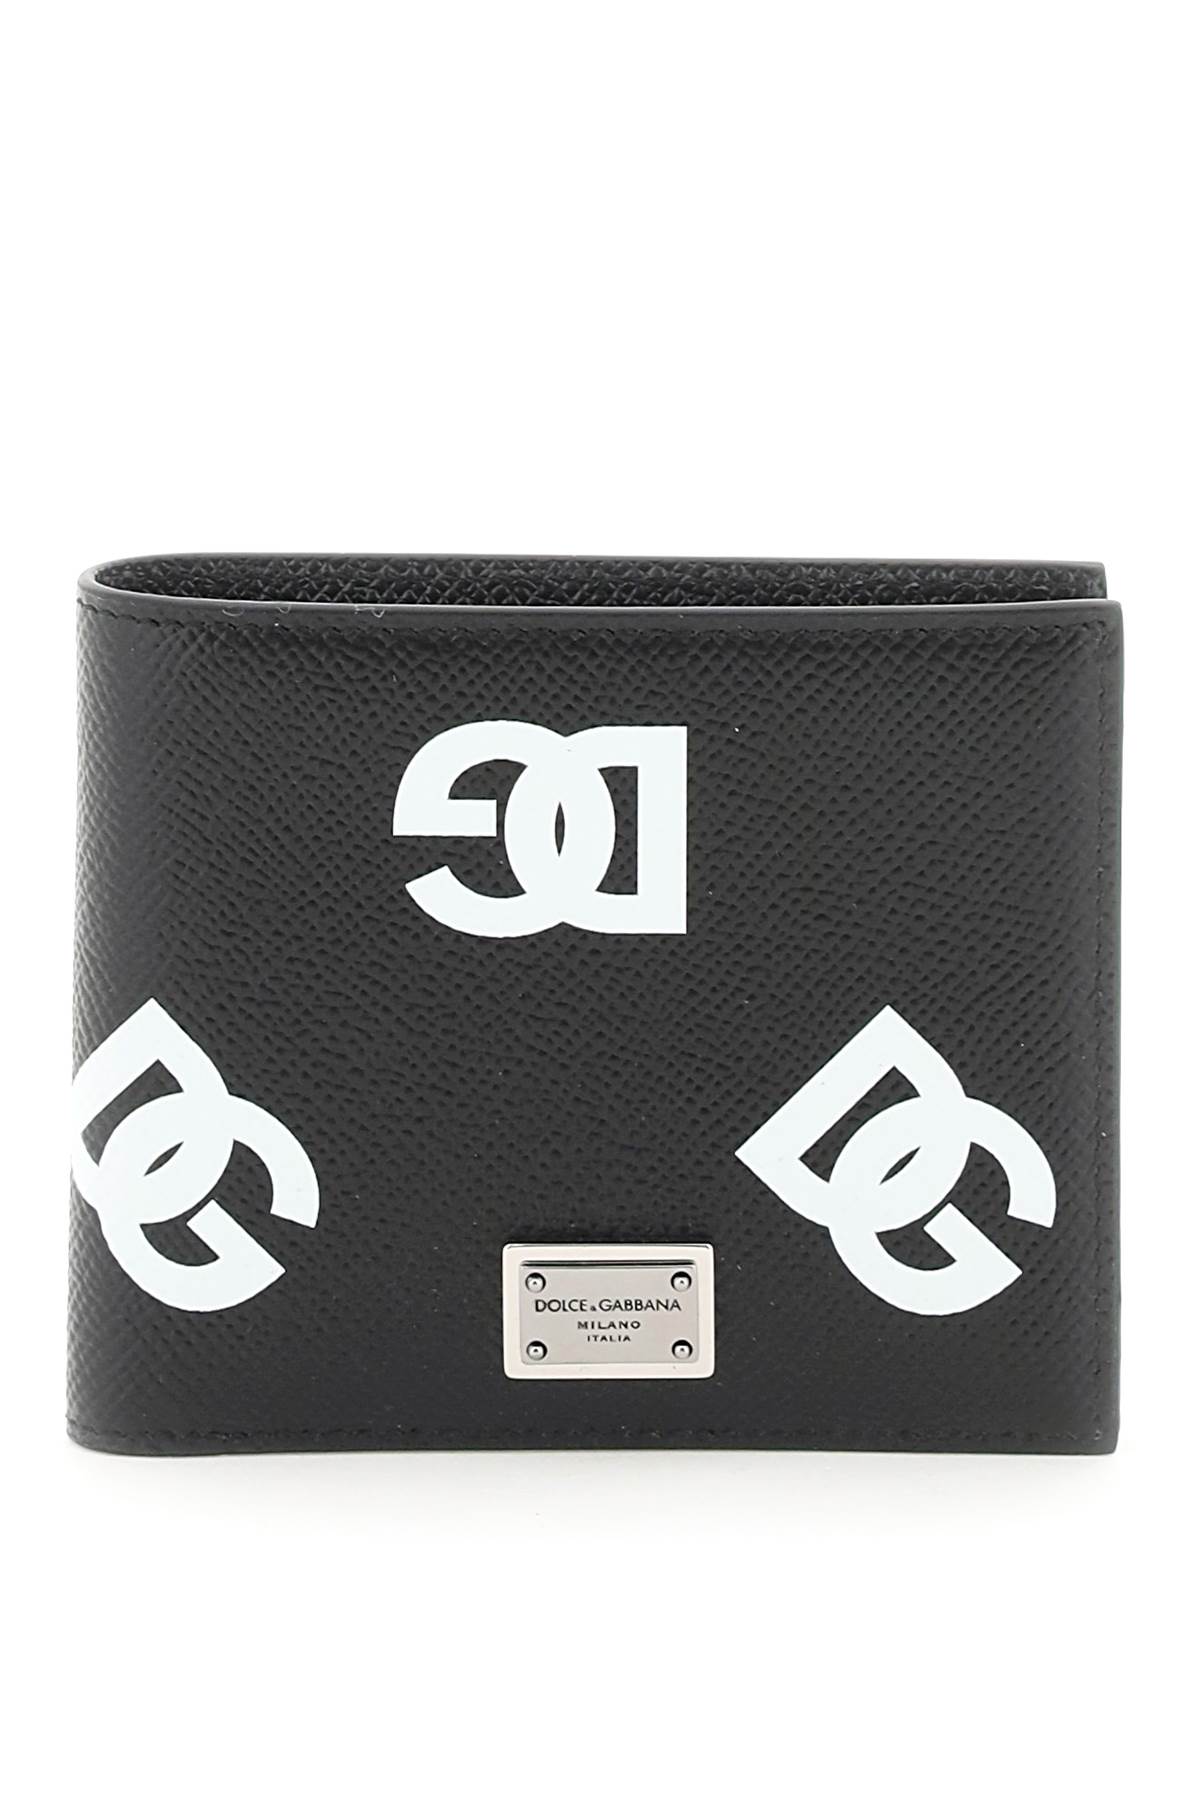 DOLCE & GABBANA LEATHER WALLET WITH PRINT